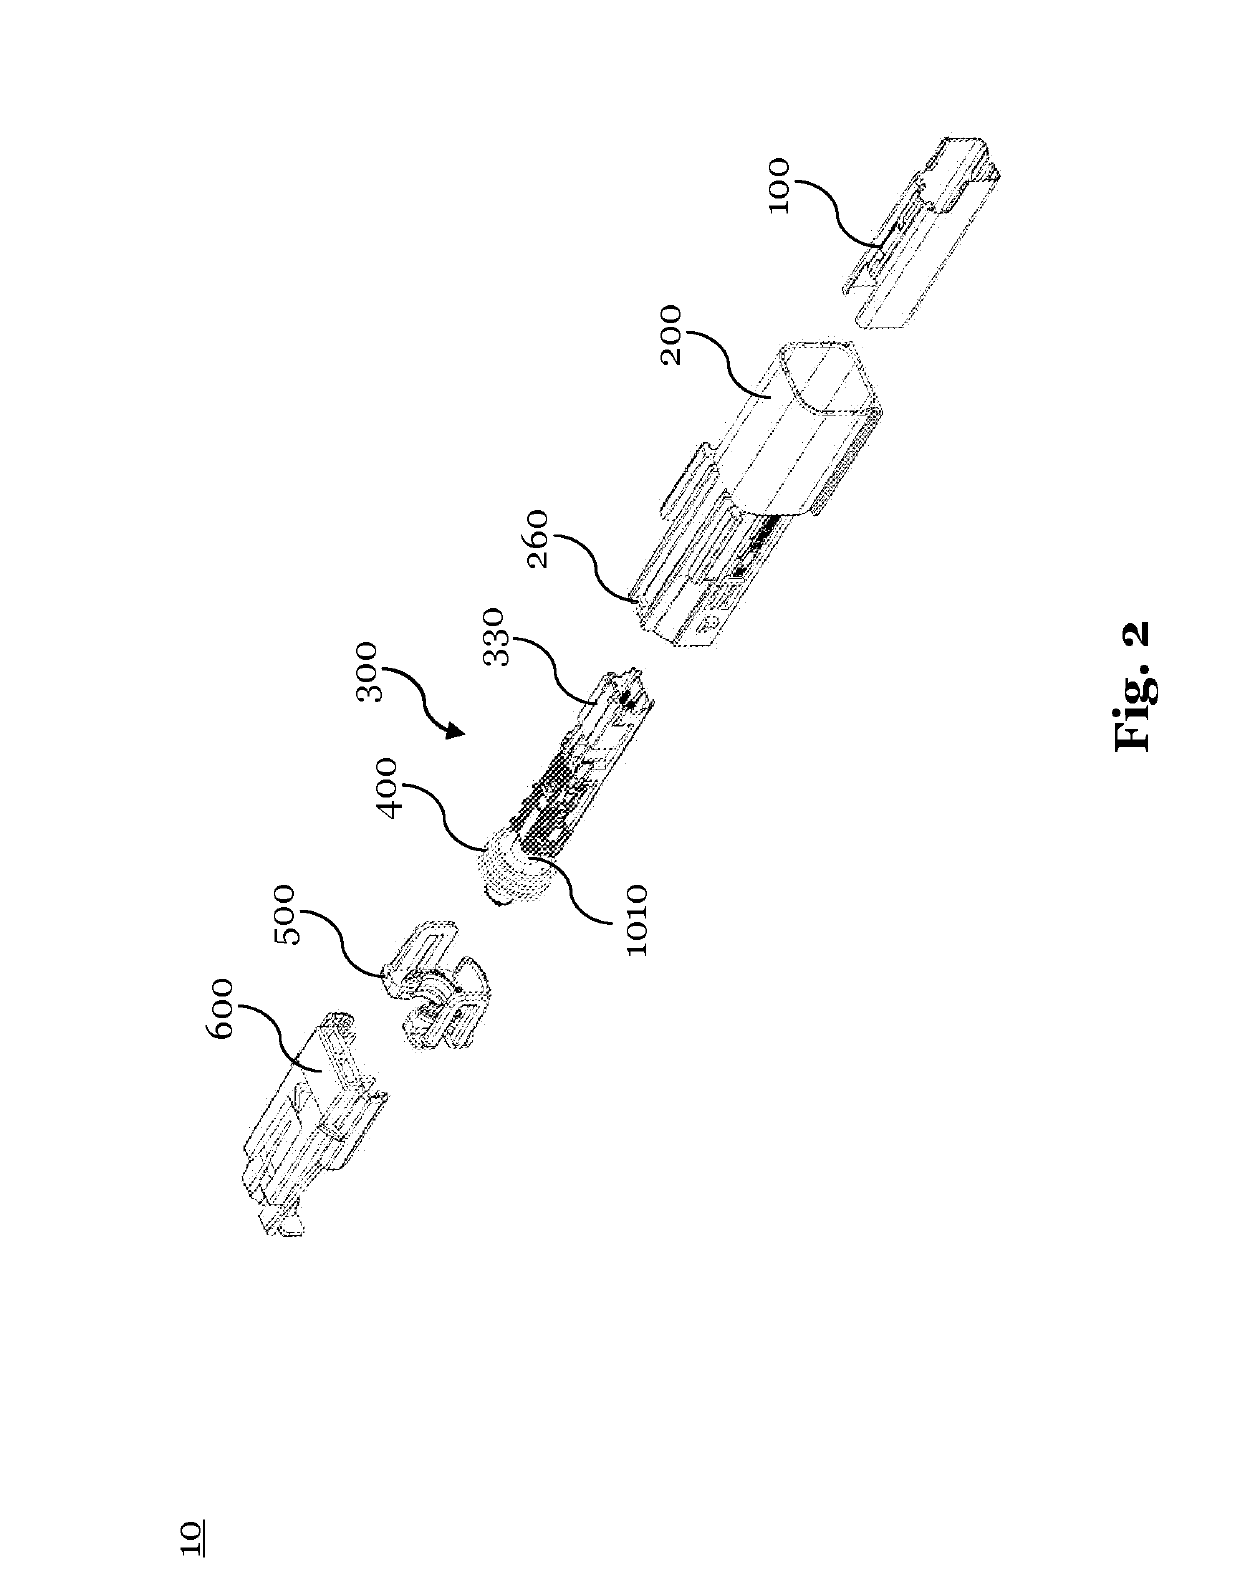 Electrical shielding member for a network connector